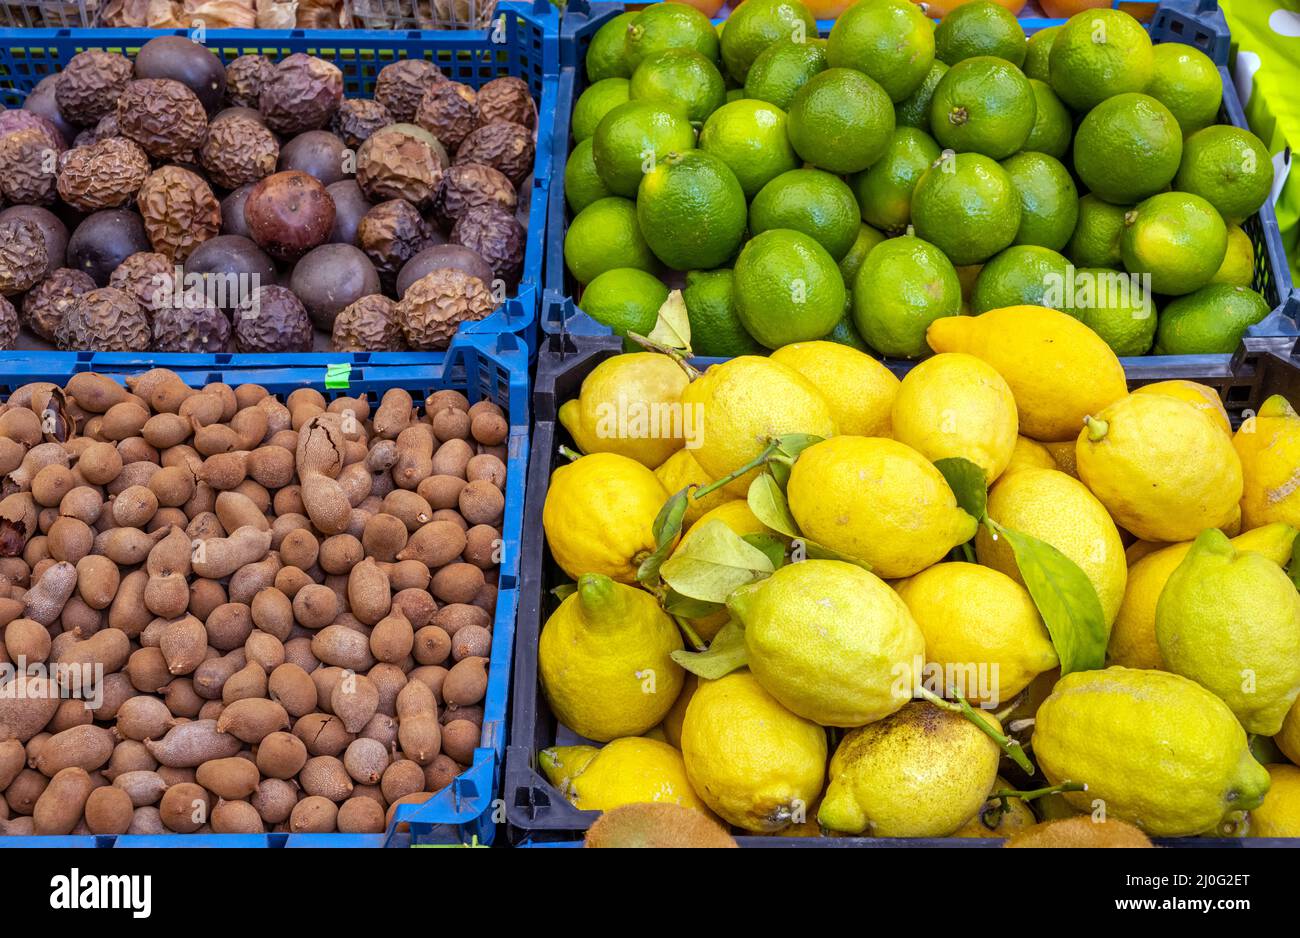 Passion fruits, tamarinds and lemons for sale at a market Stock Photo